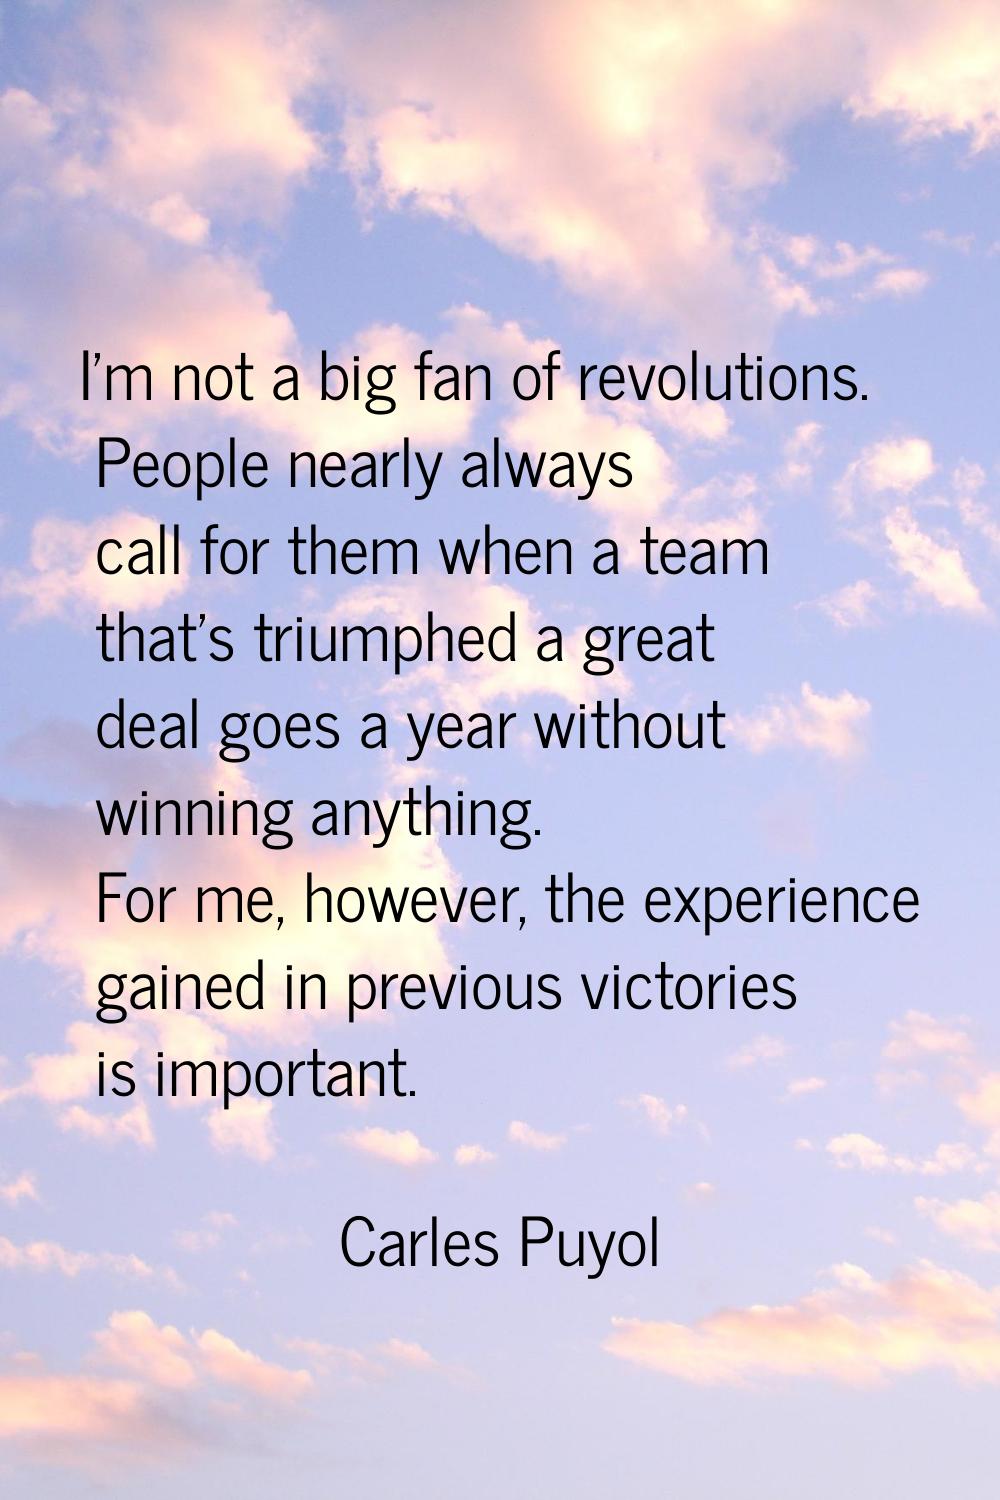 I'm not a big fan of revolutions. People nearly always call for them when a team that's triumphed a